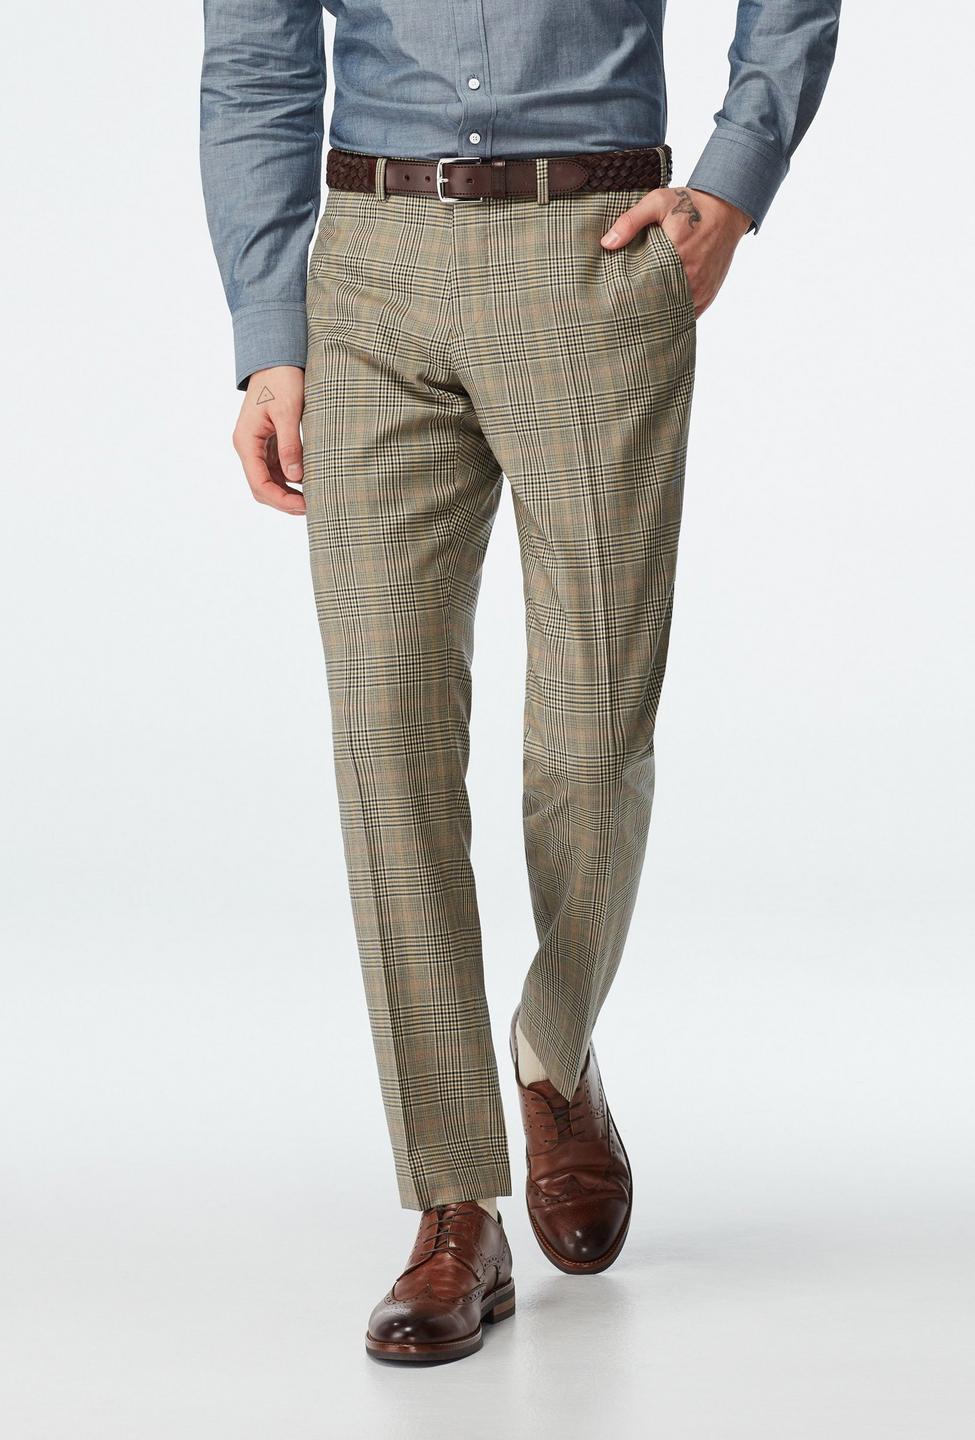 Brown pants - Sunderland Plaid Design from Seasonal Indochino Collection